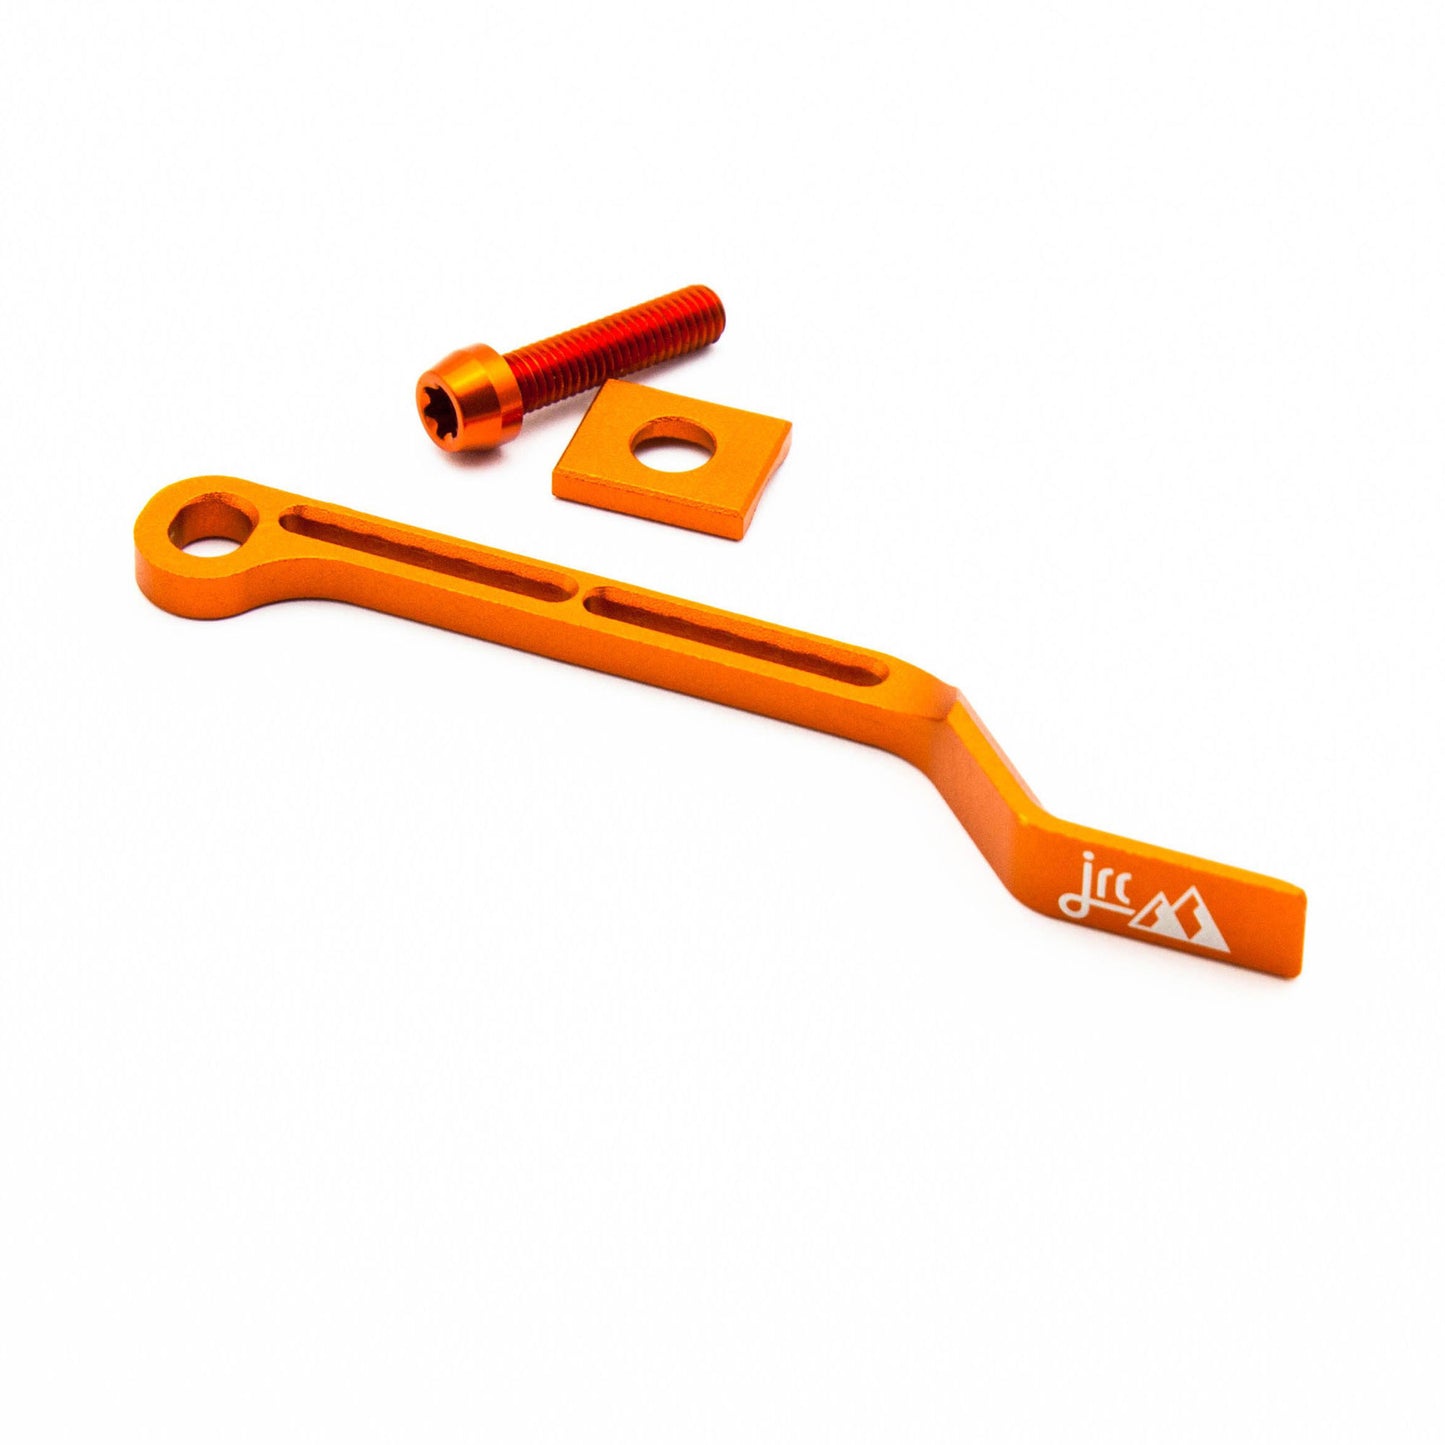 Orange, lightweight aluminium bicycle chain catcher kit with alloy mounting bolts and braze-clamp spacer